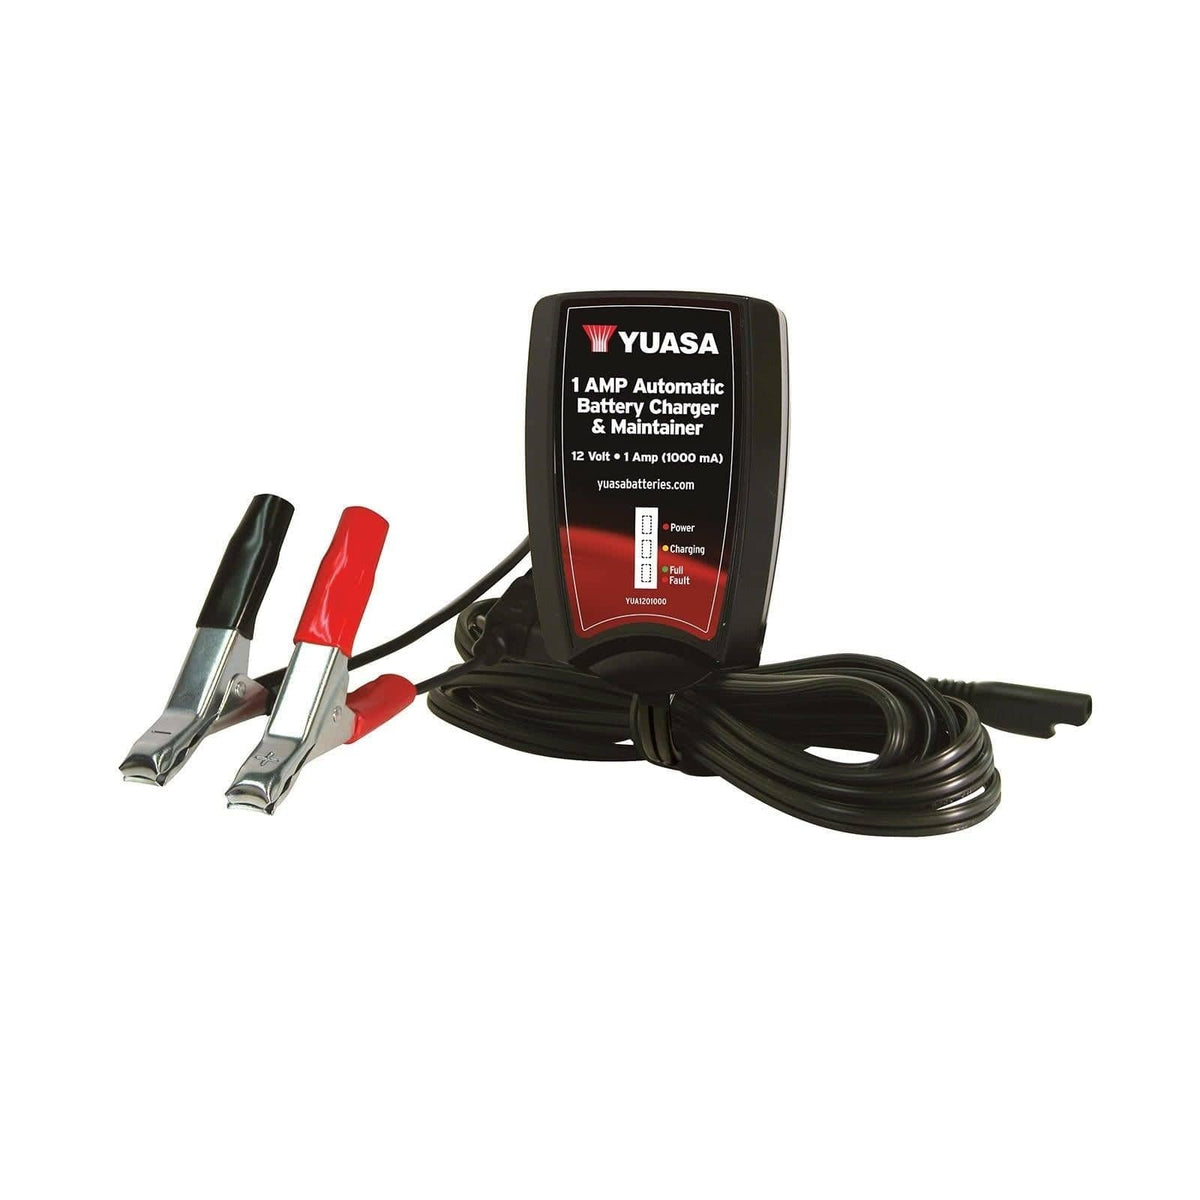 YUASAAutomatic 1 amp Battery Charger